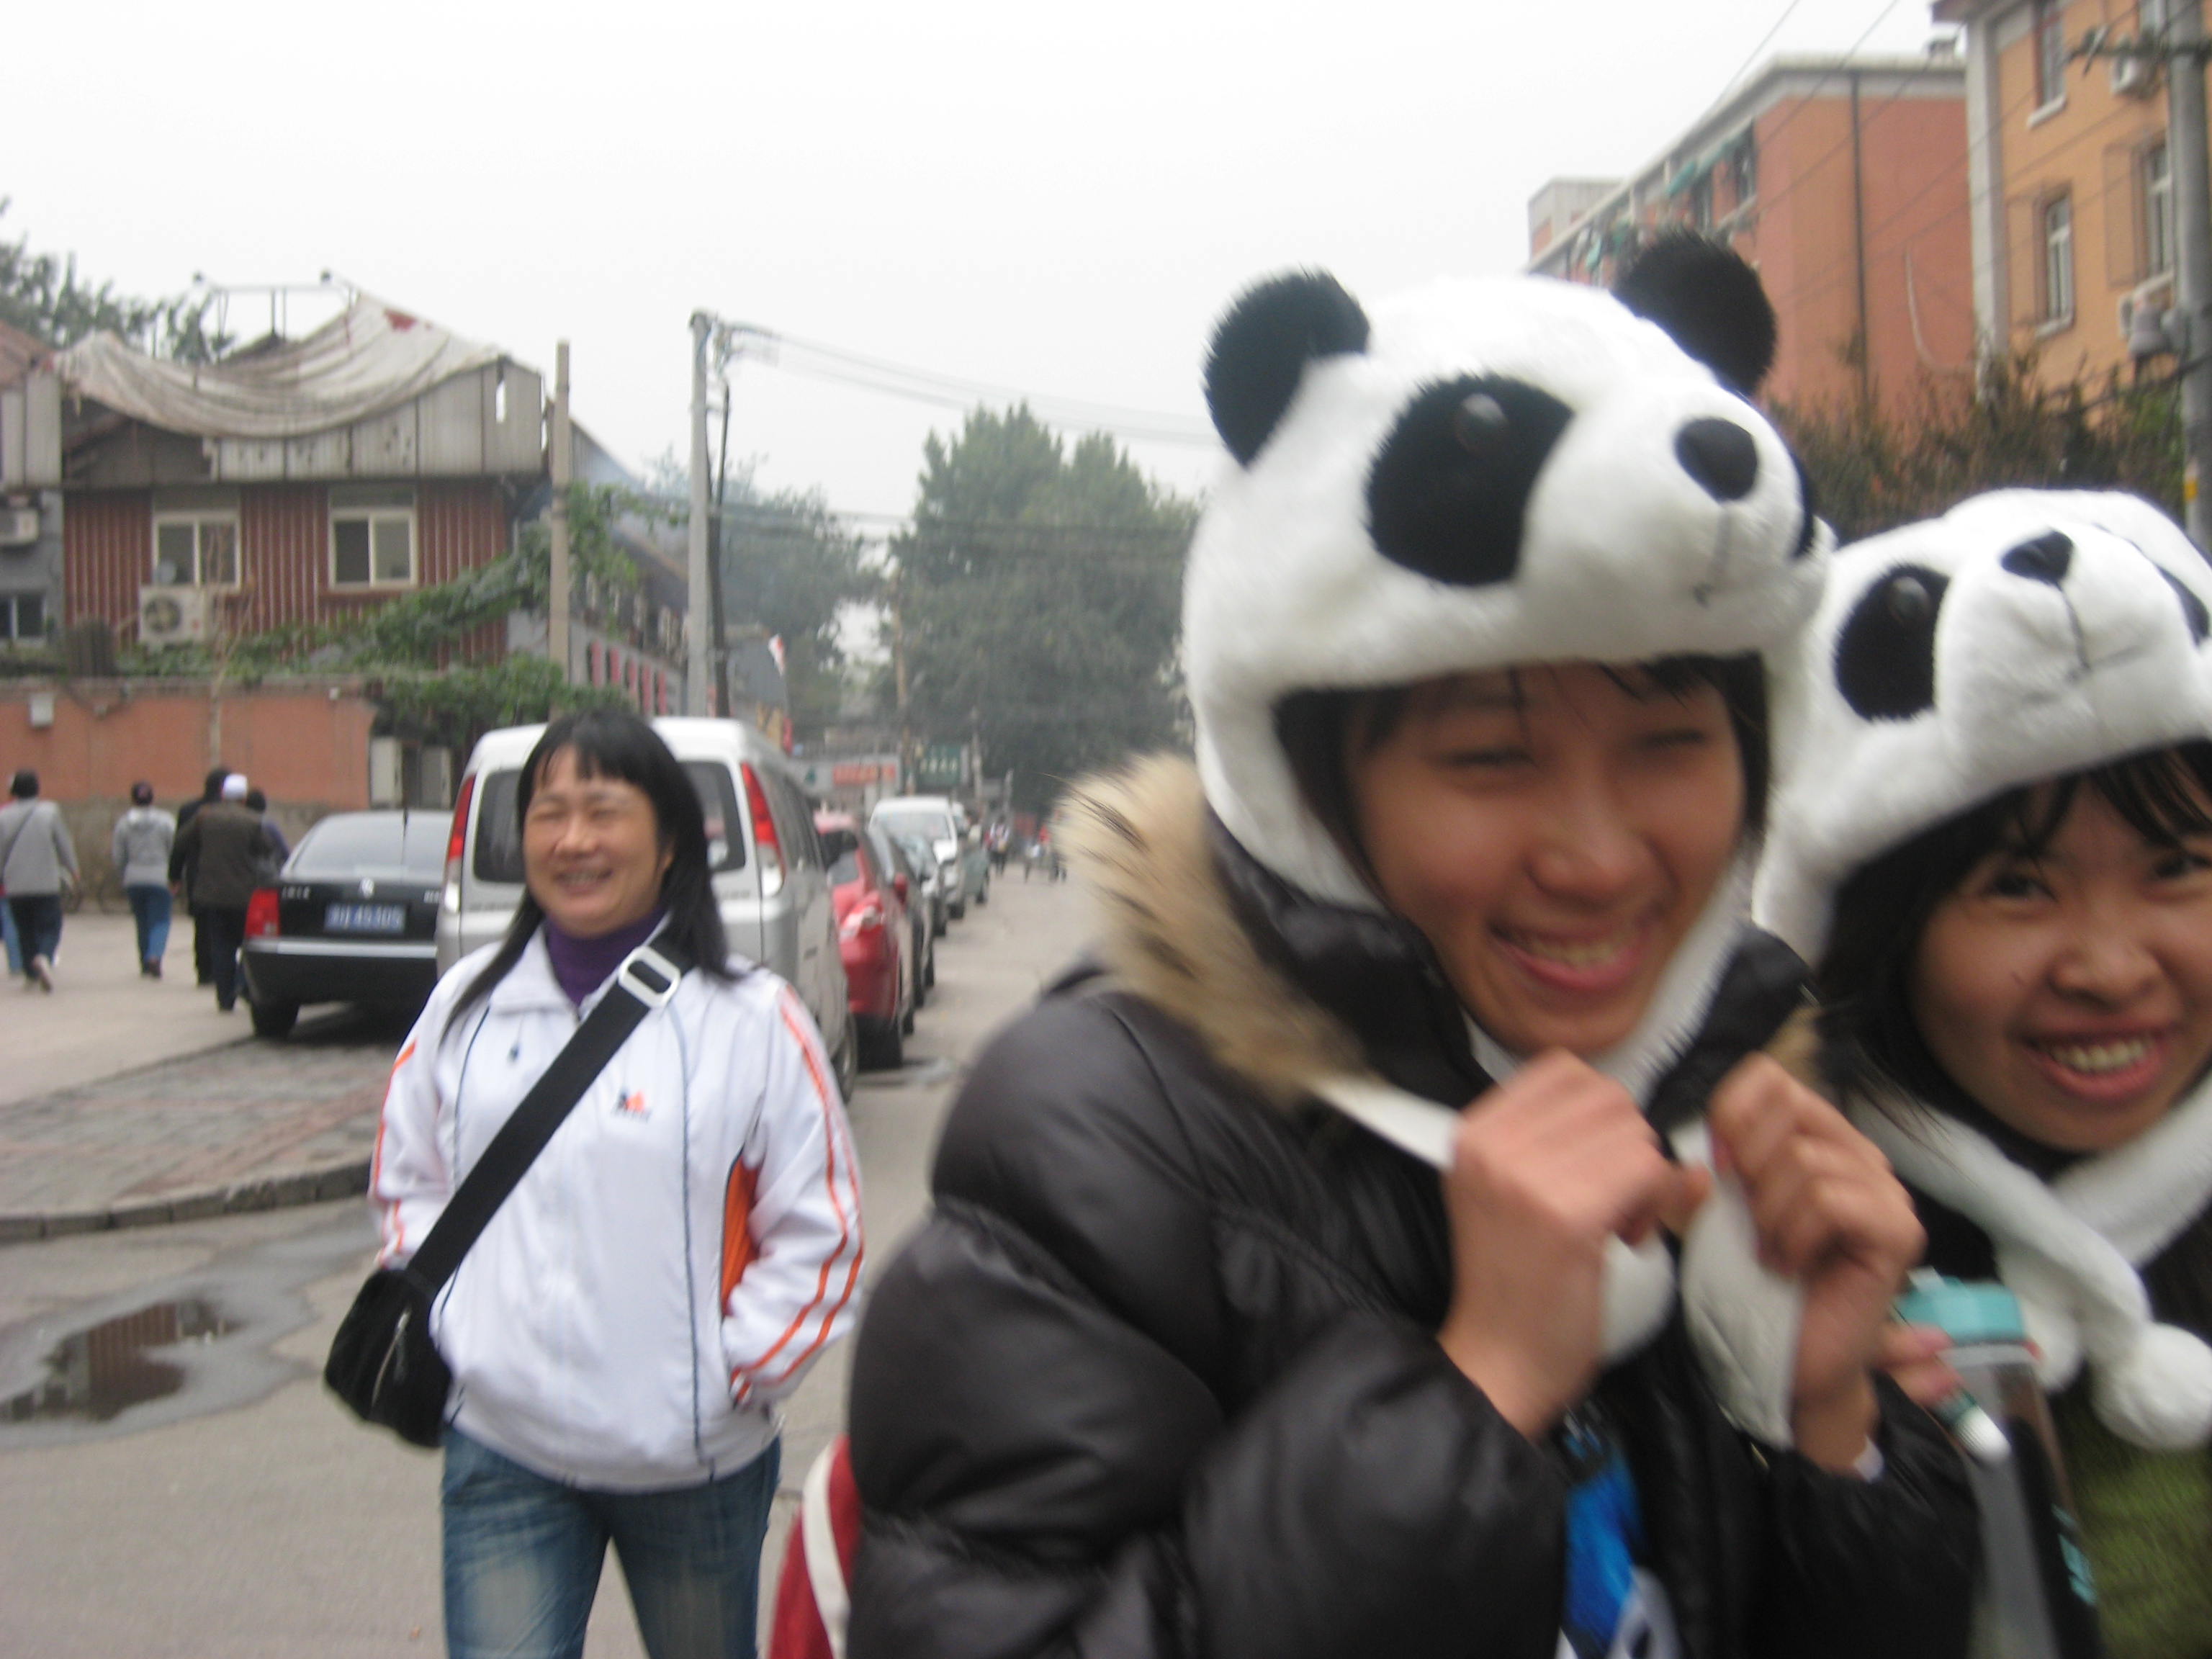 giggly girls in panda hats